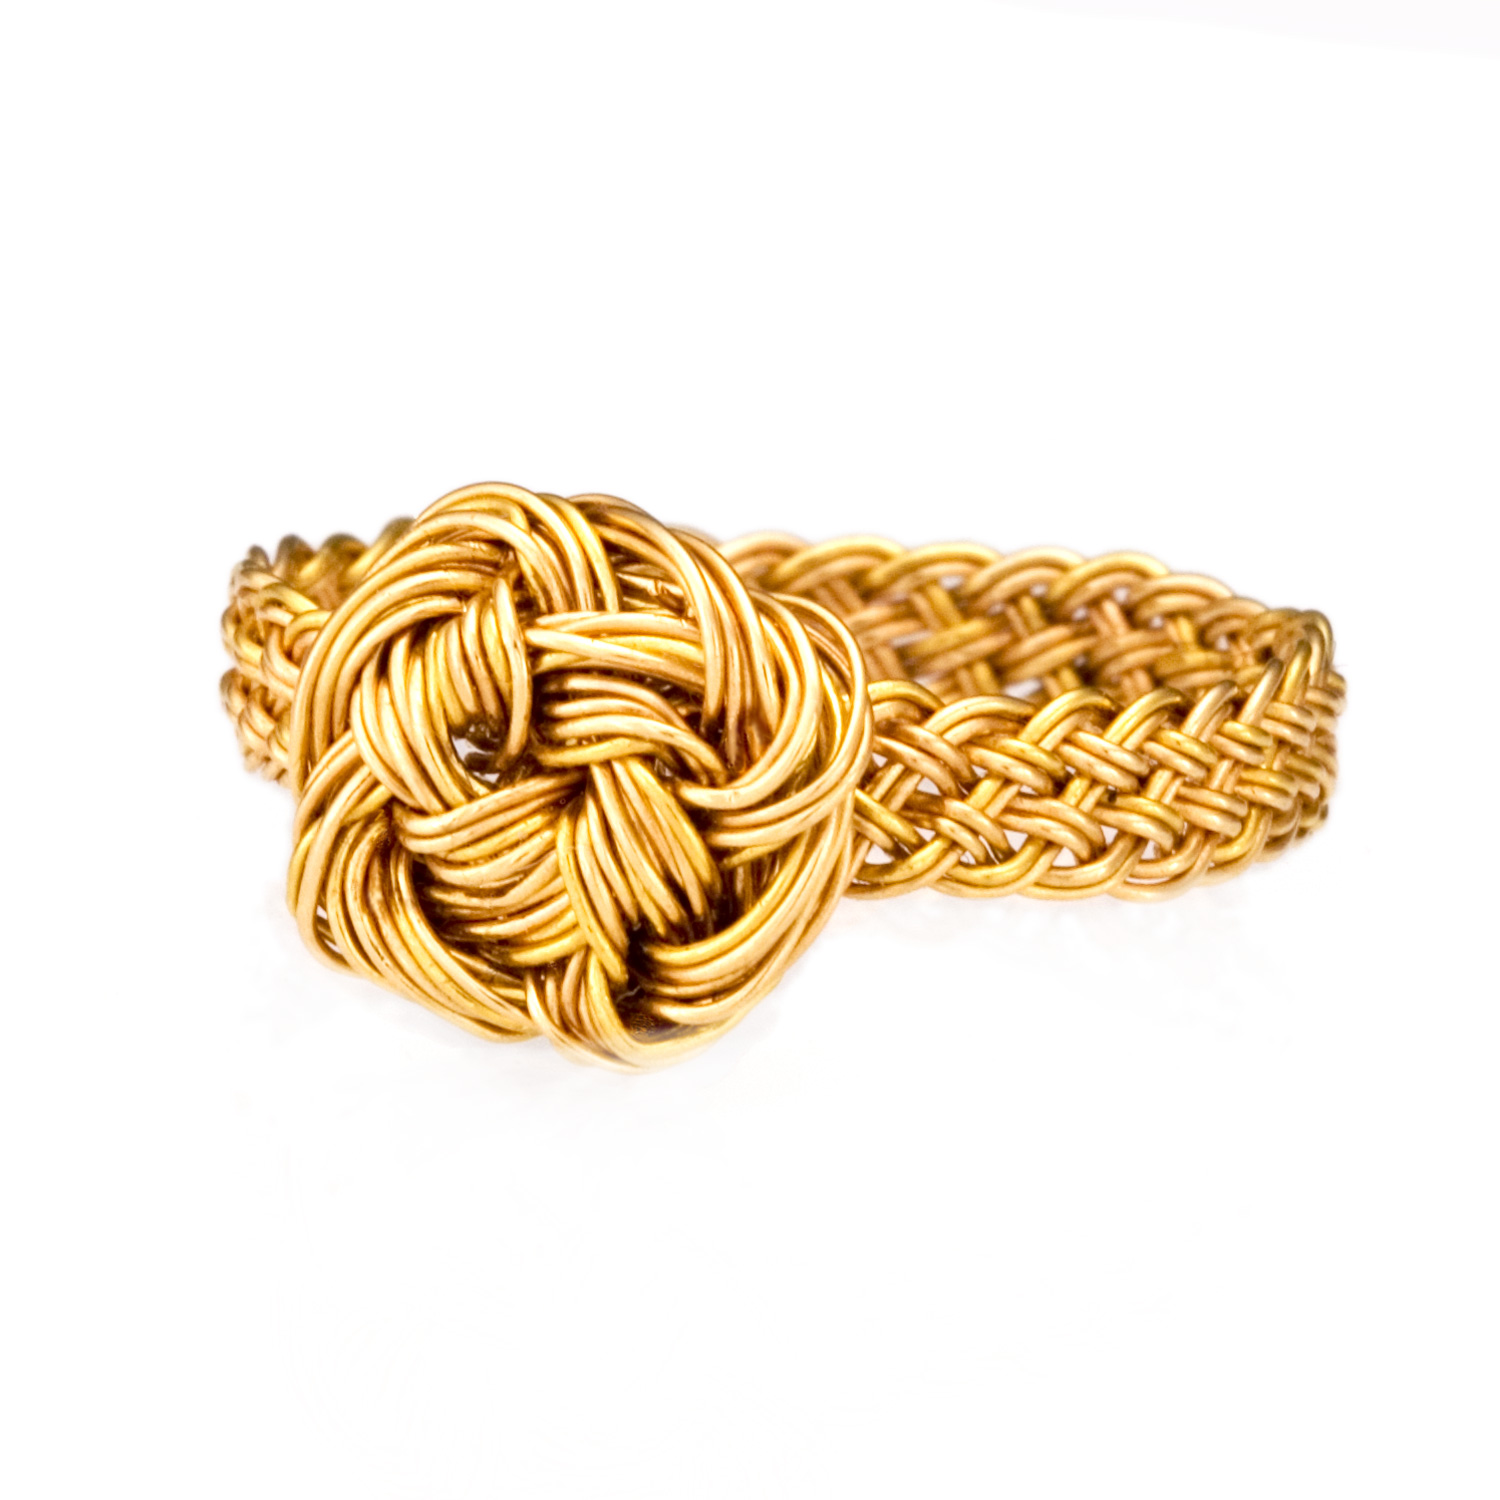 Turks Knot Ring by Tamberlaine